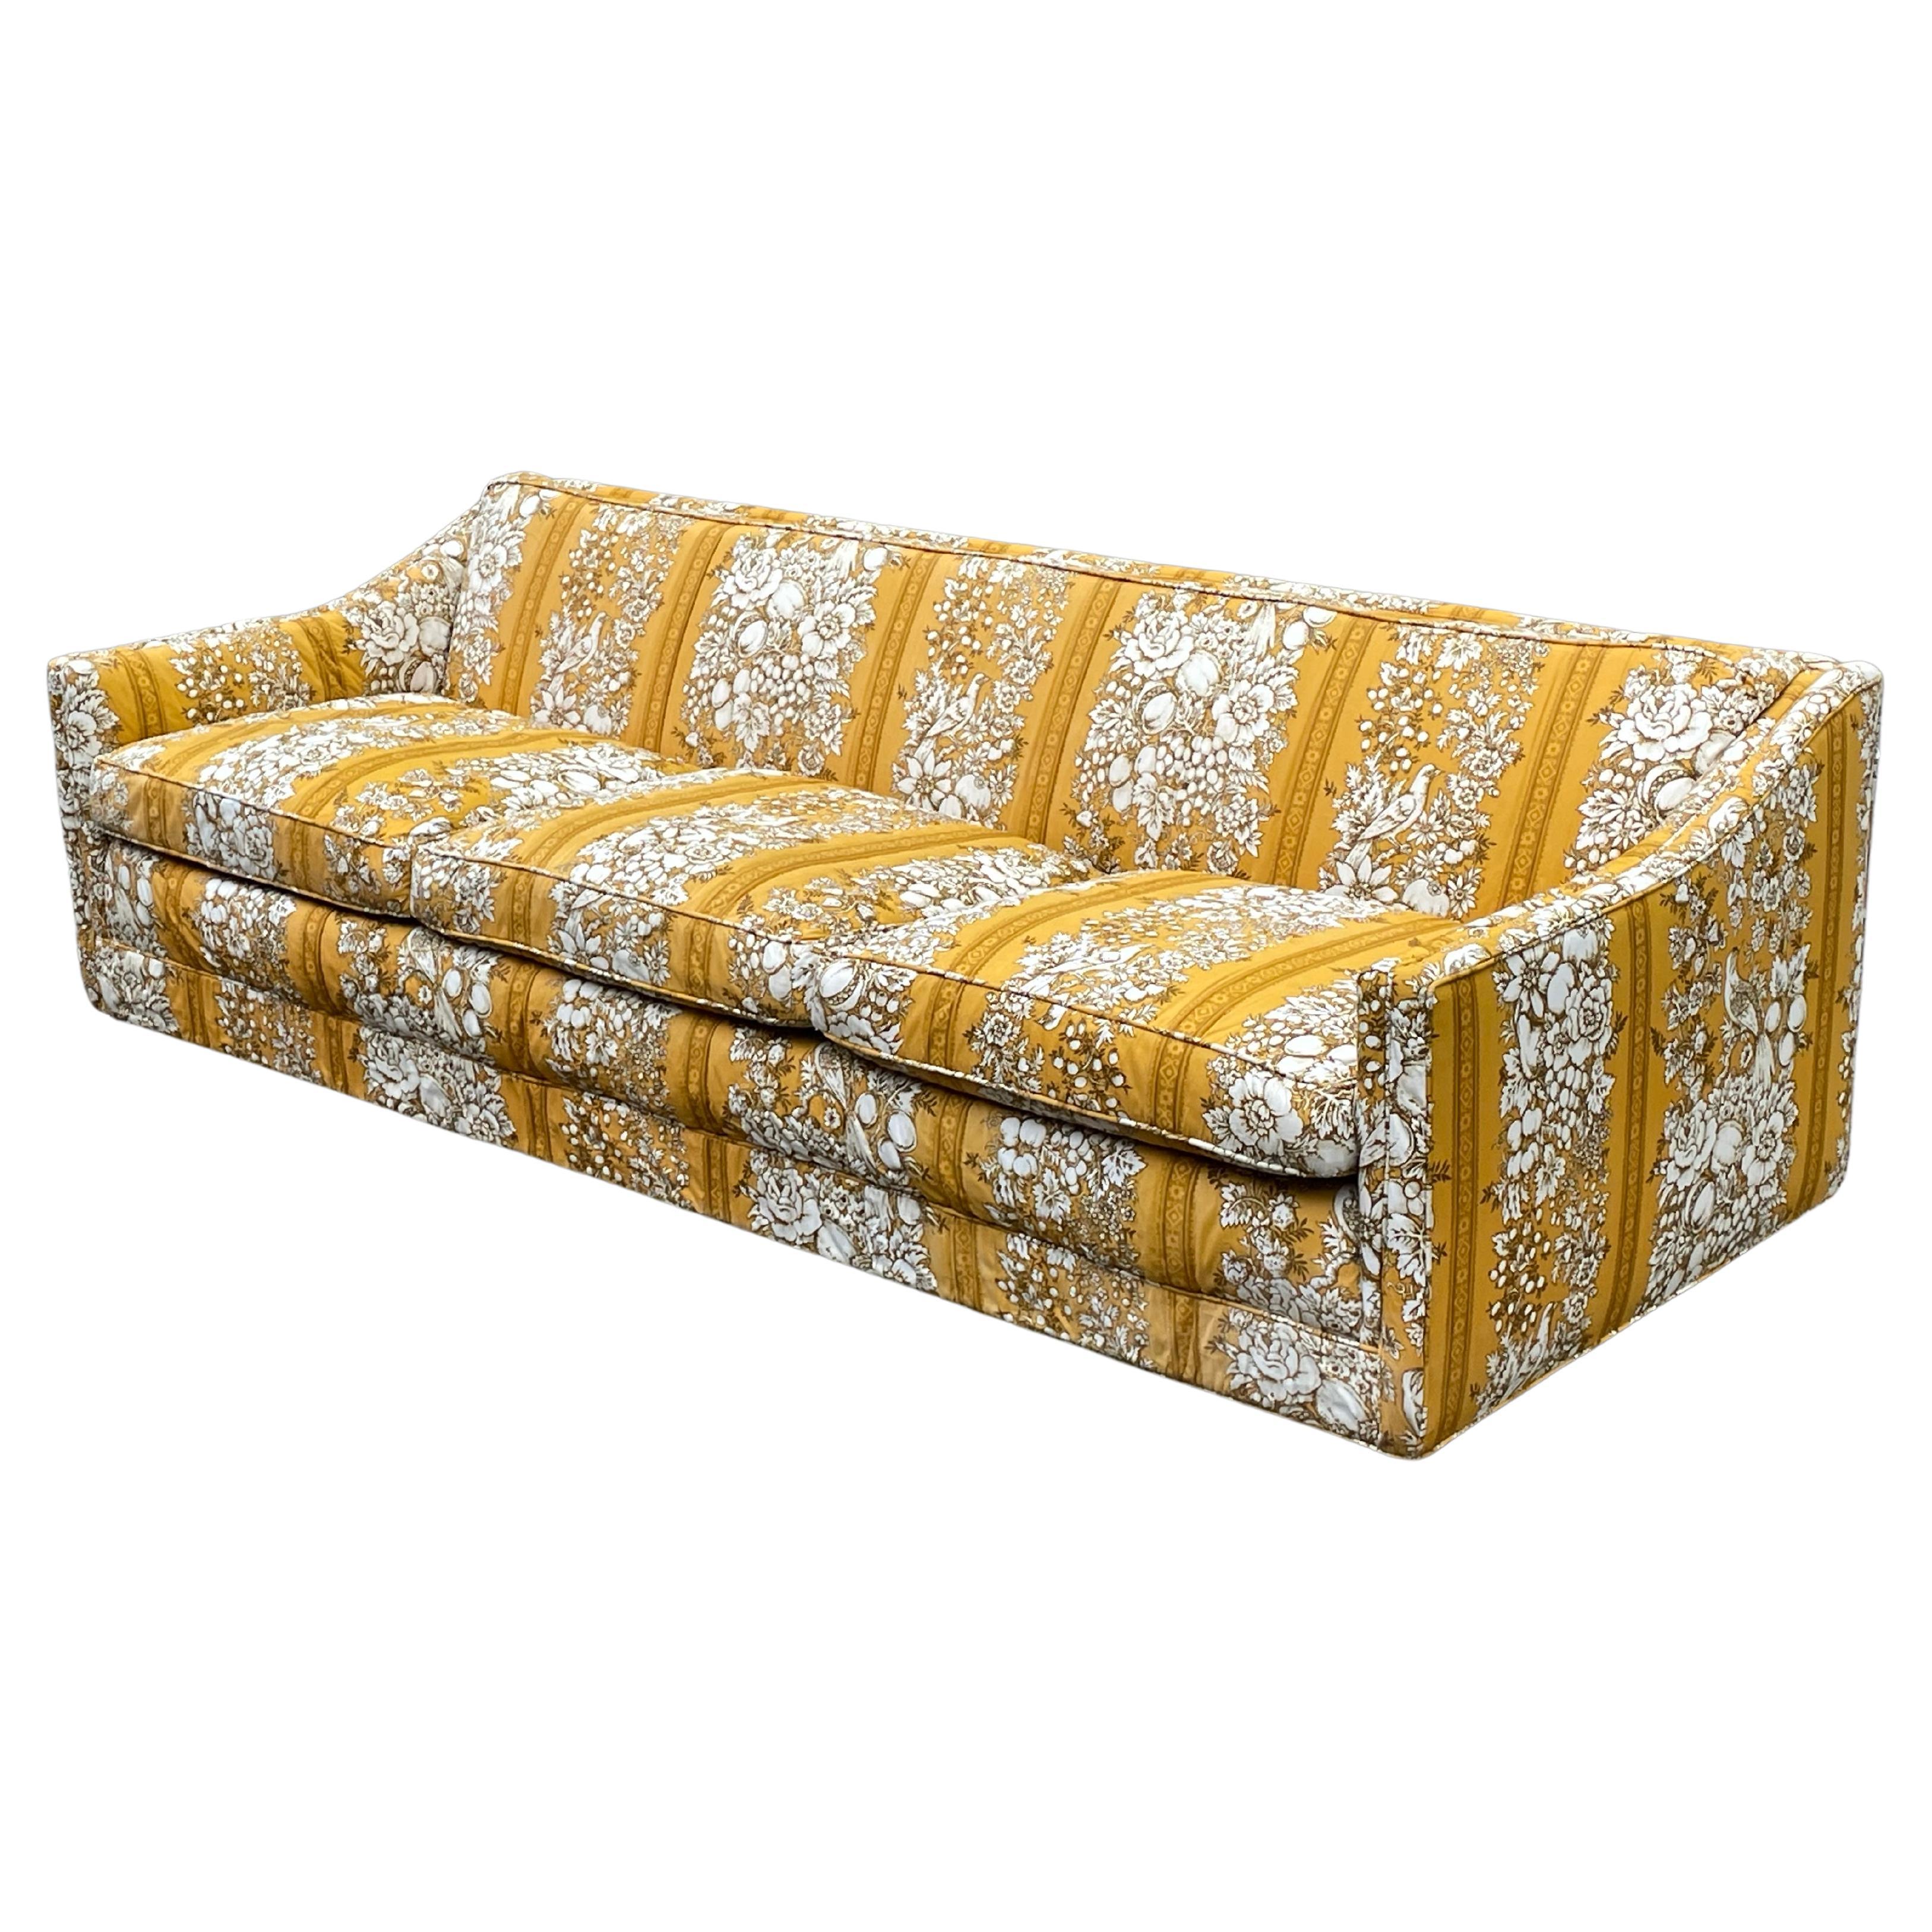 Vintage sculptural 60s sofa with gorgeous original yellow fabric. It was a custom made sofa by the luxury department store Bullocks in Los Angeles.

Came out of an estate in Brentwood area of Los Angeles.

This sofa is in amazing condition. Looks